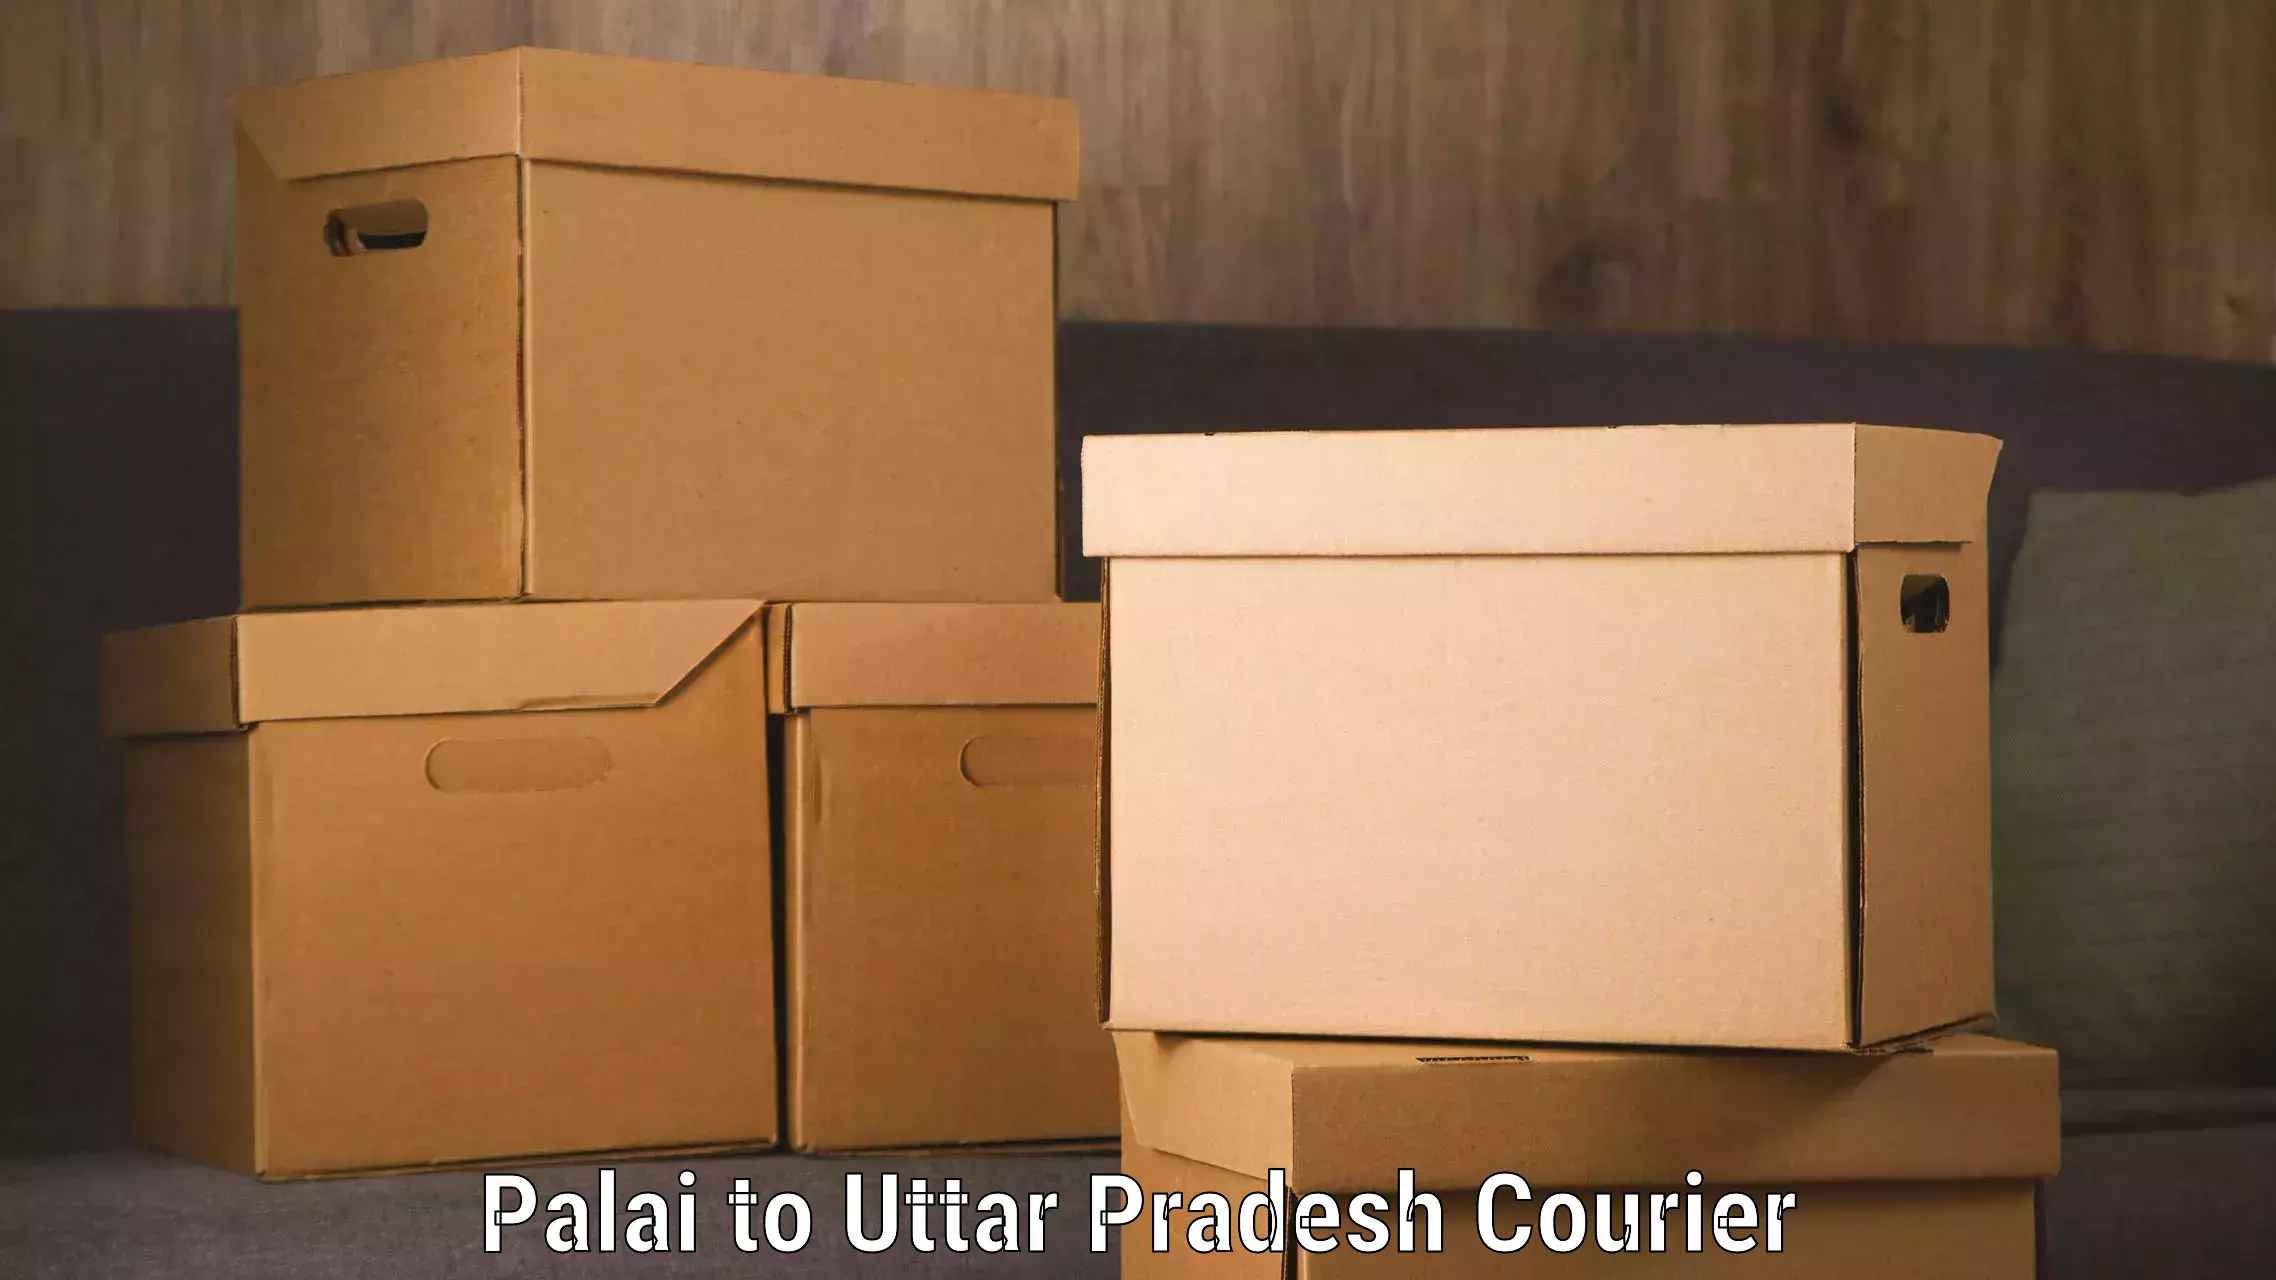 Easy access courier services Palai to Rath